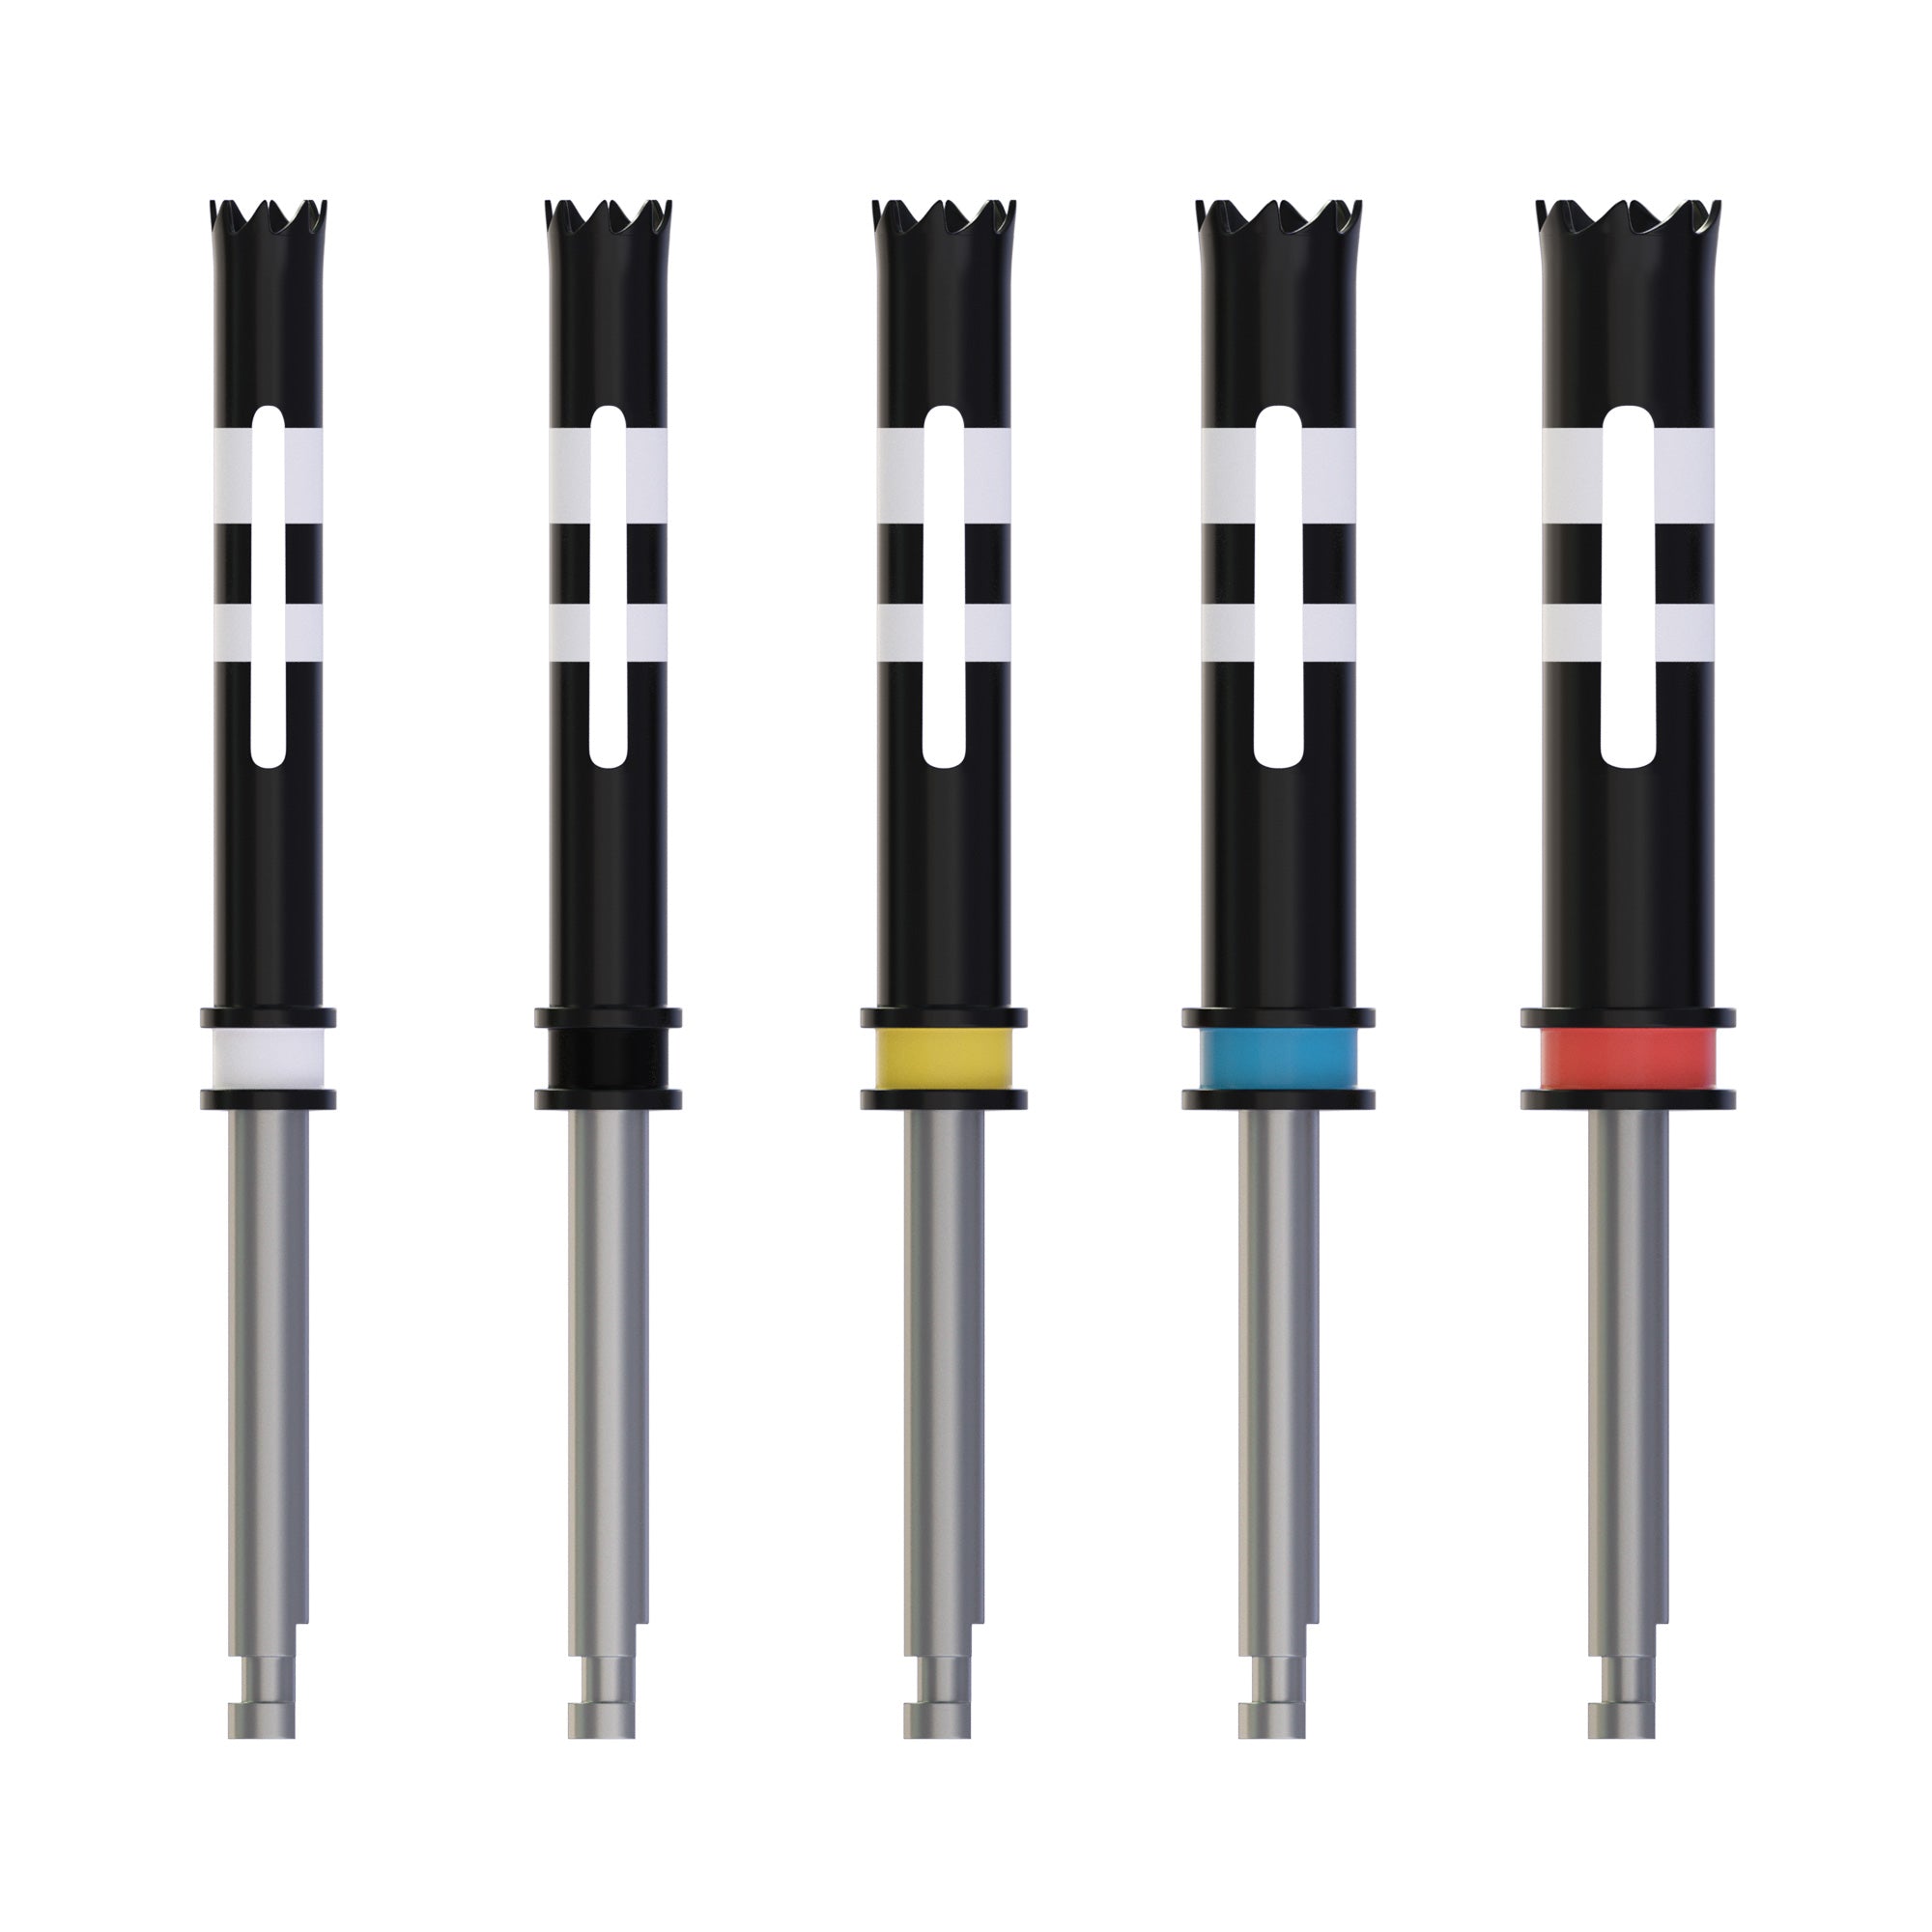 DSI Surgical Implantology Smart Trephine Drills With DLC Coating